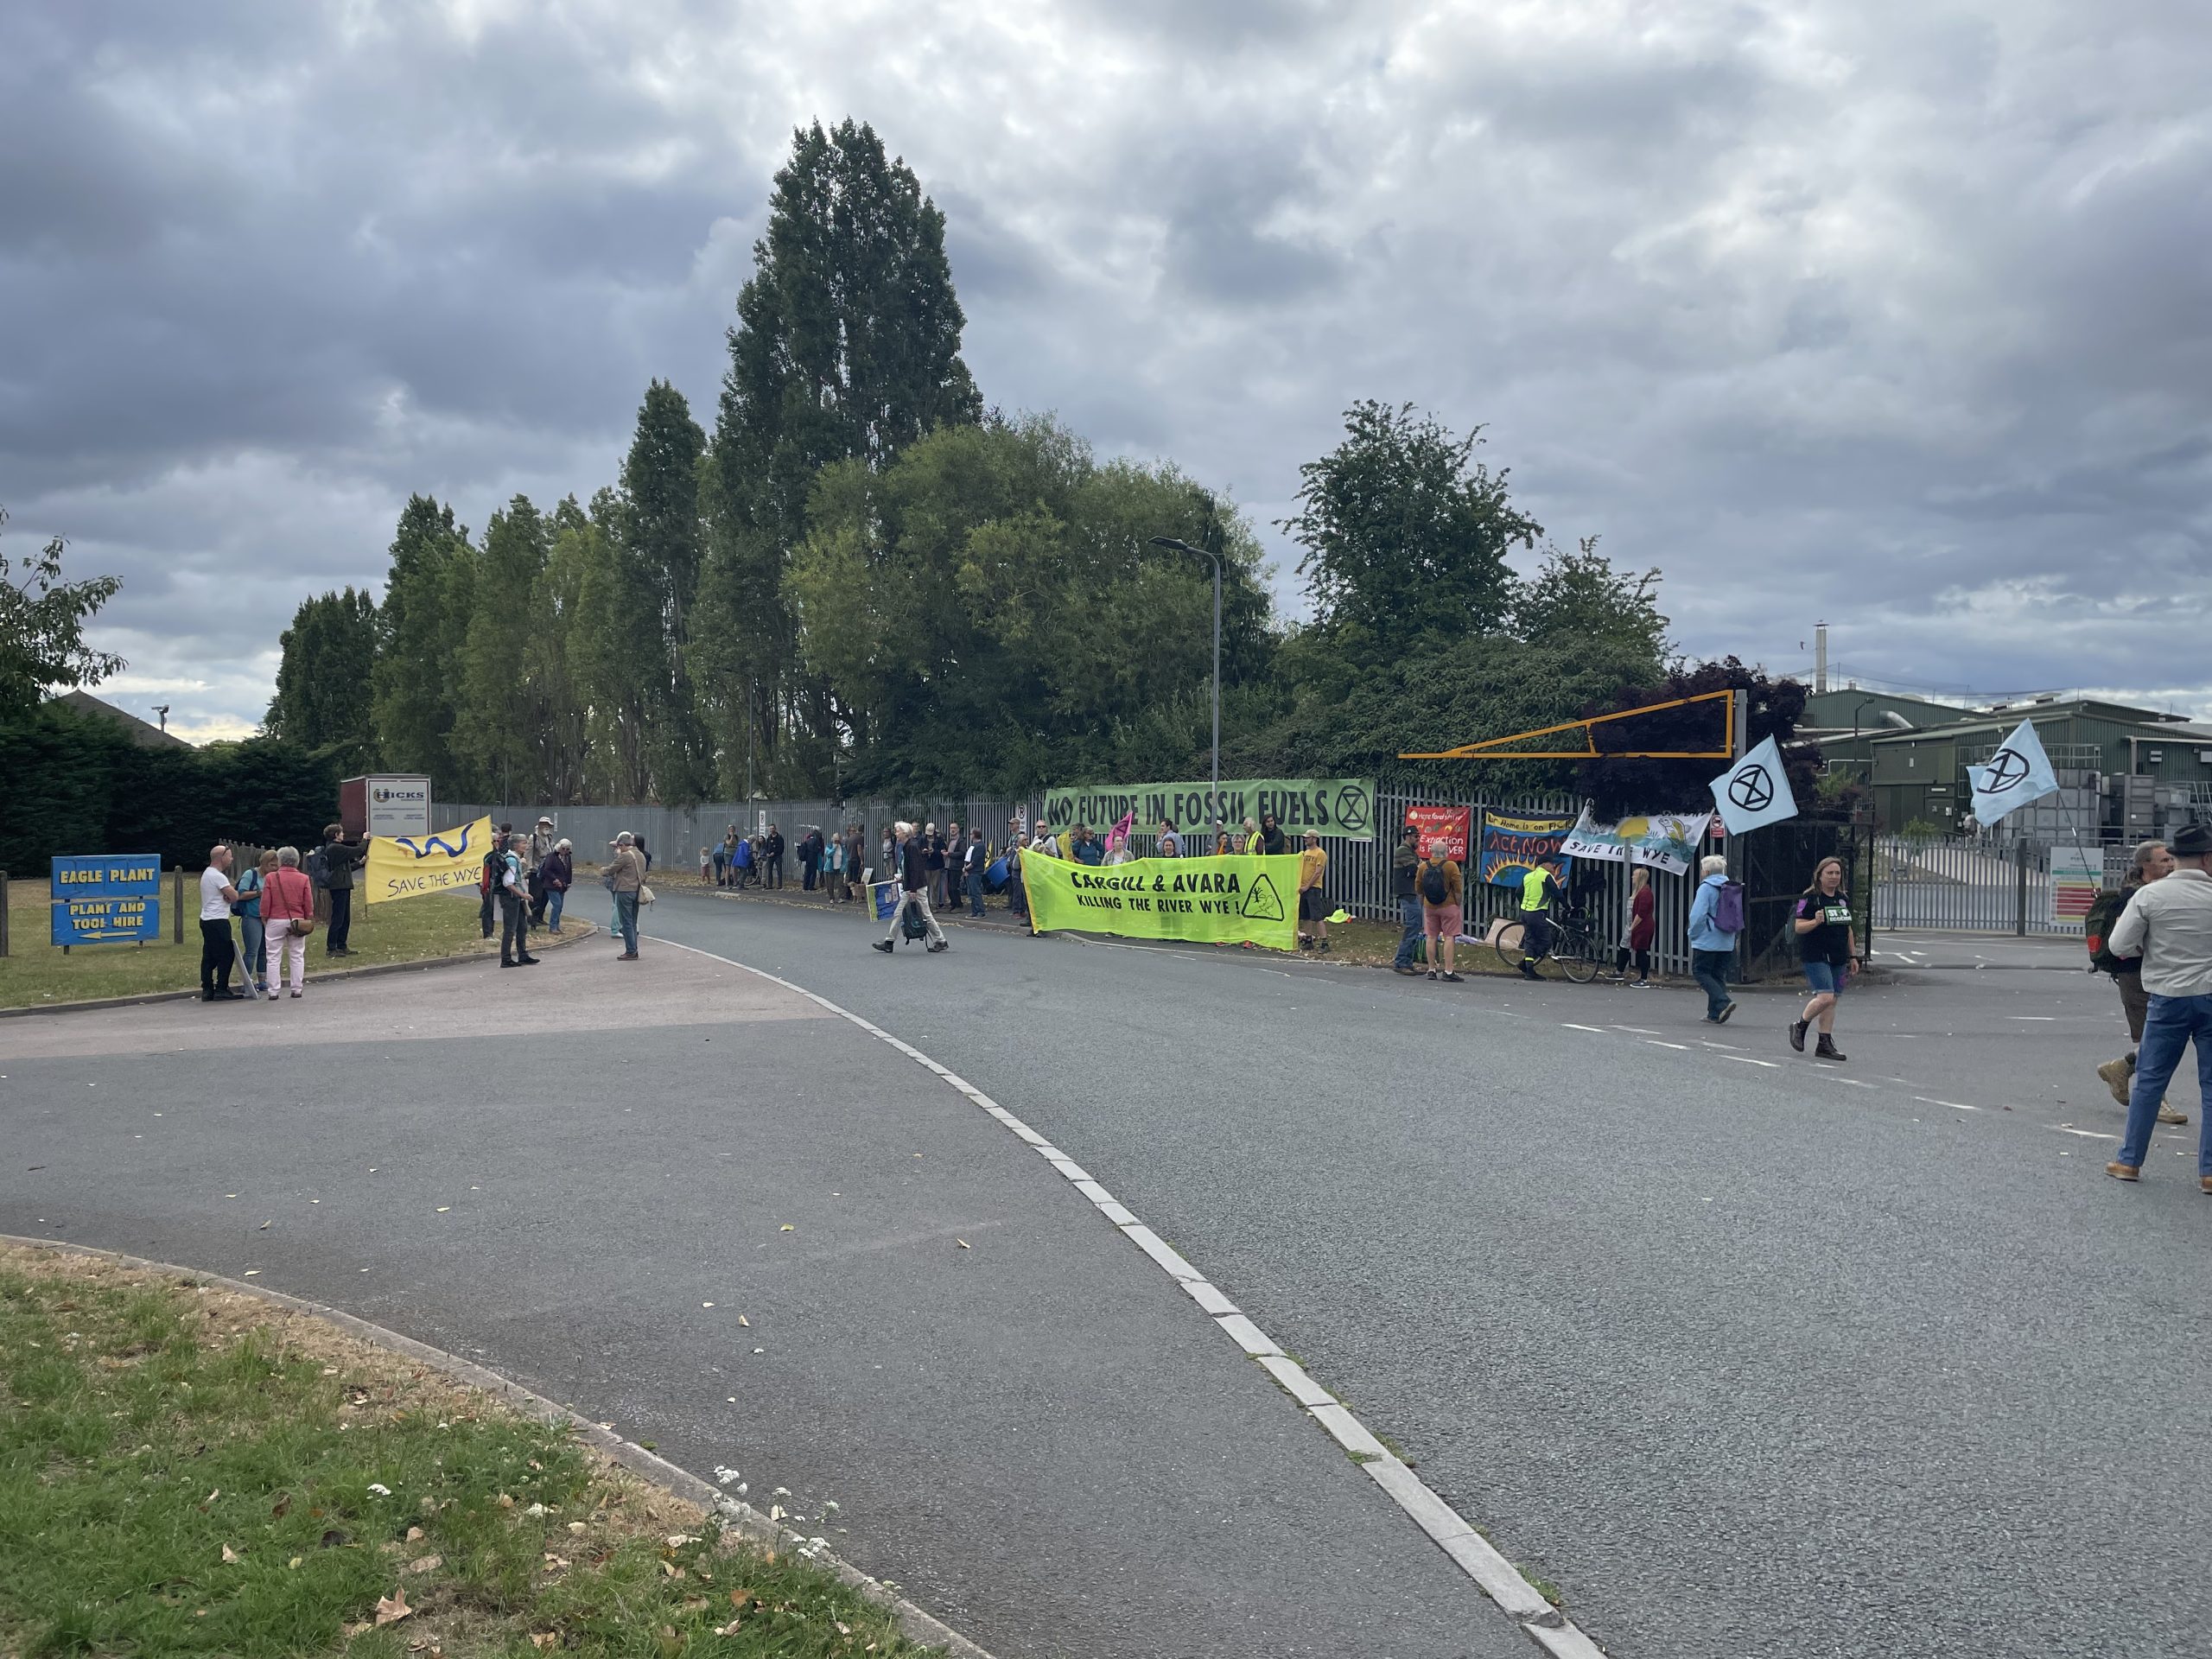 NEWS | Around 100 protesters are gathering at Avara in Hereford this morning